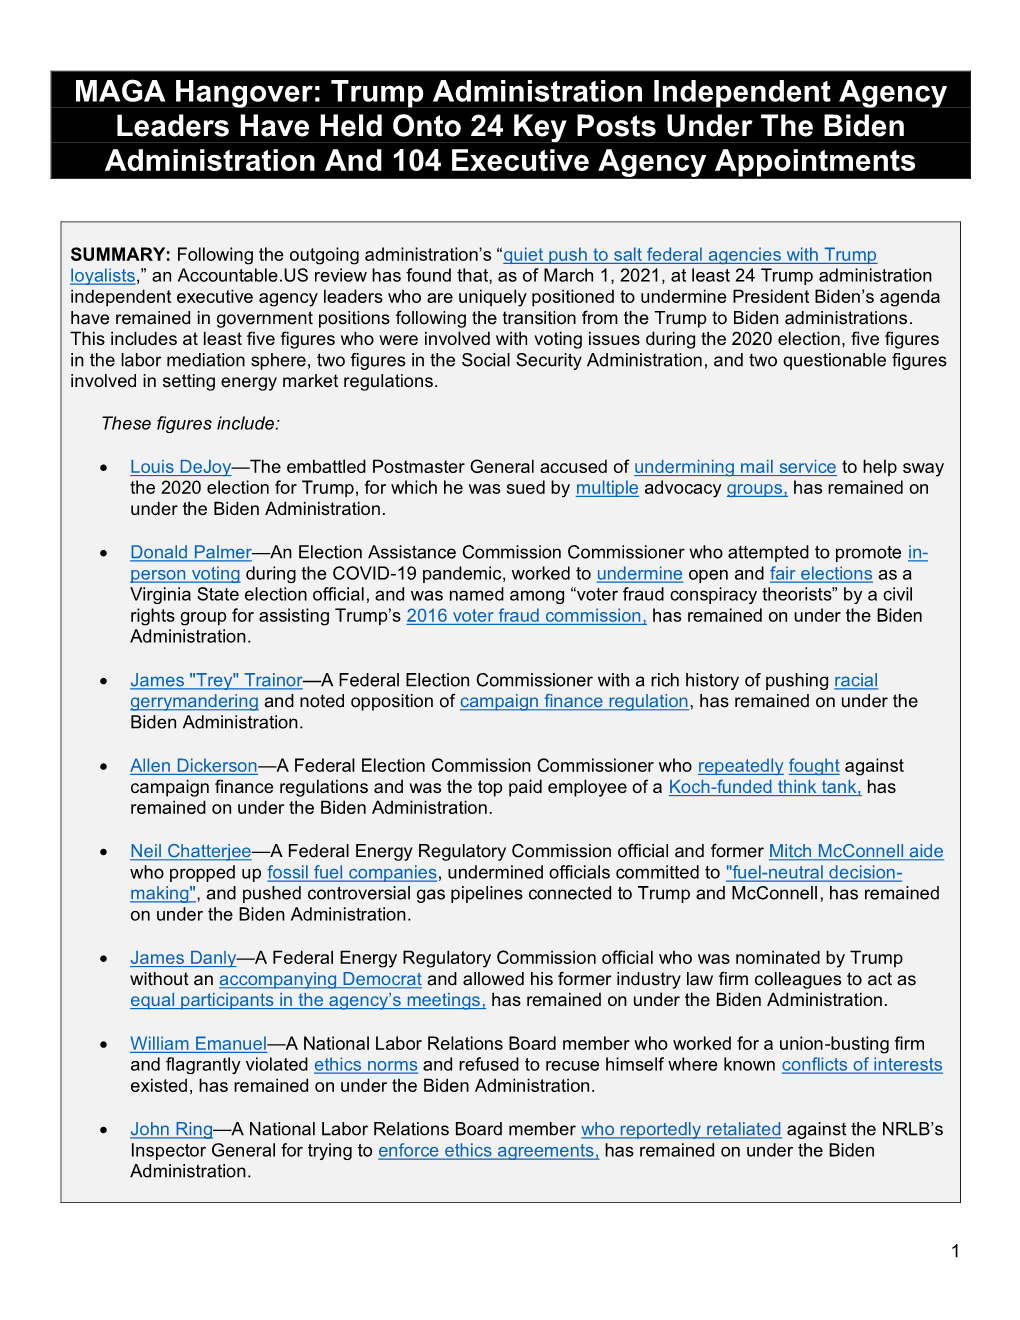 MAGA Hangover: Trump Administration Independent Agency Leaders Have Held Onto 24 Key Posts Under the Biden Administration and 104 Executive Agency Appointments